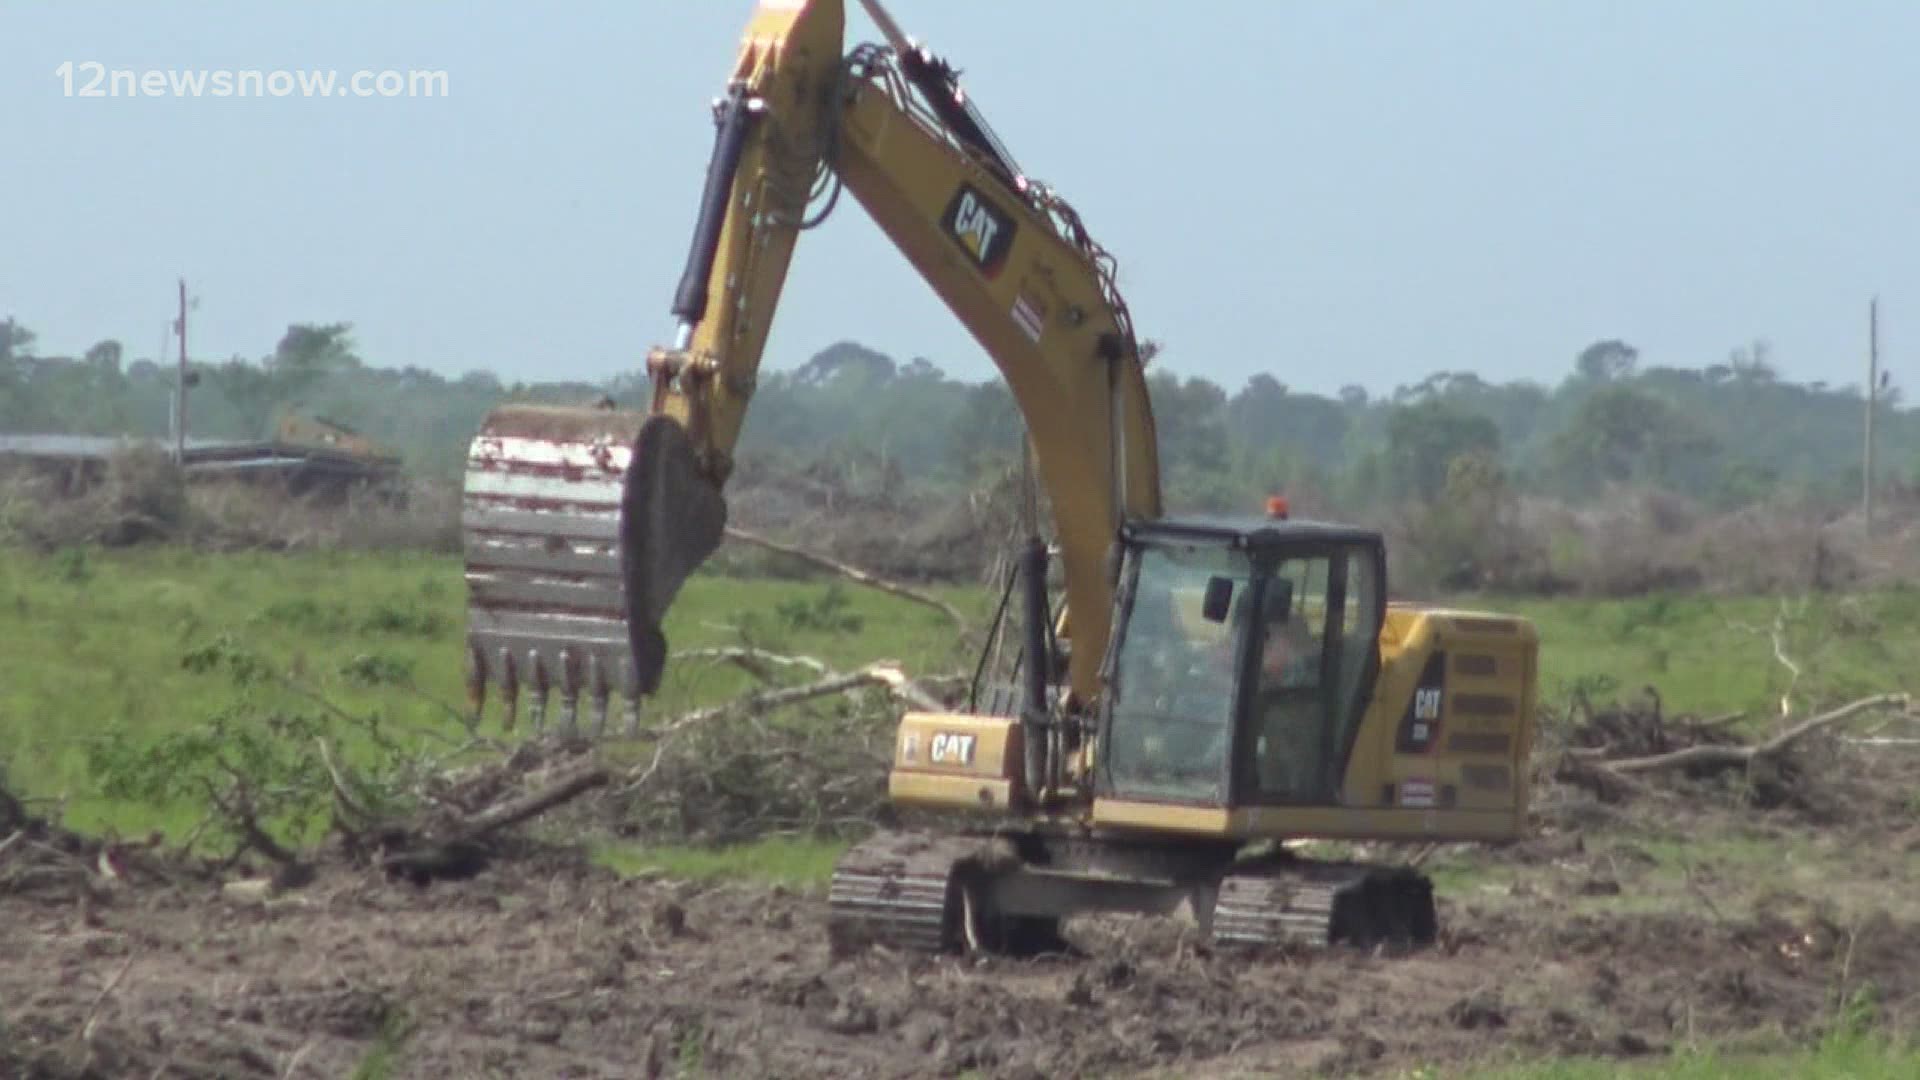 Land is currently being cleared near the site of a proposed $8 billion plant expansion in Orange County but officially the deal isn’t done yet.